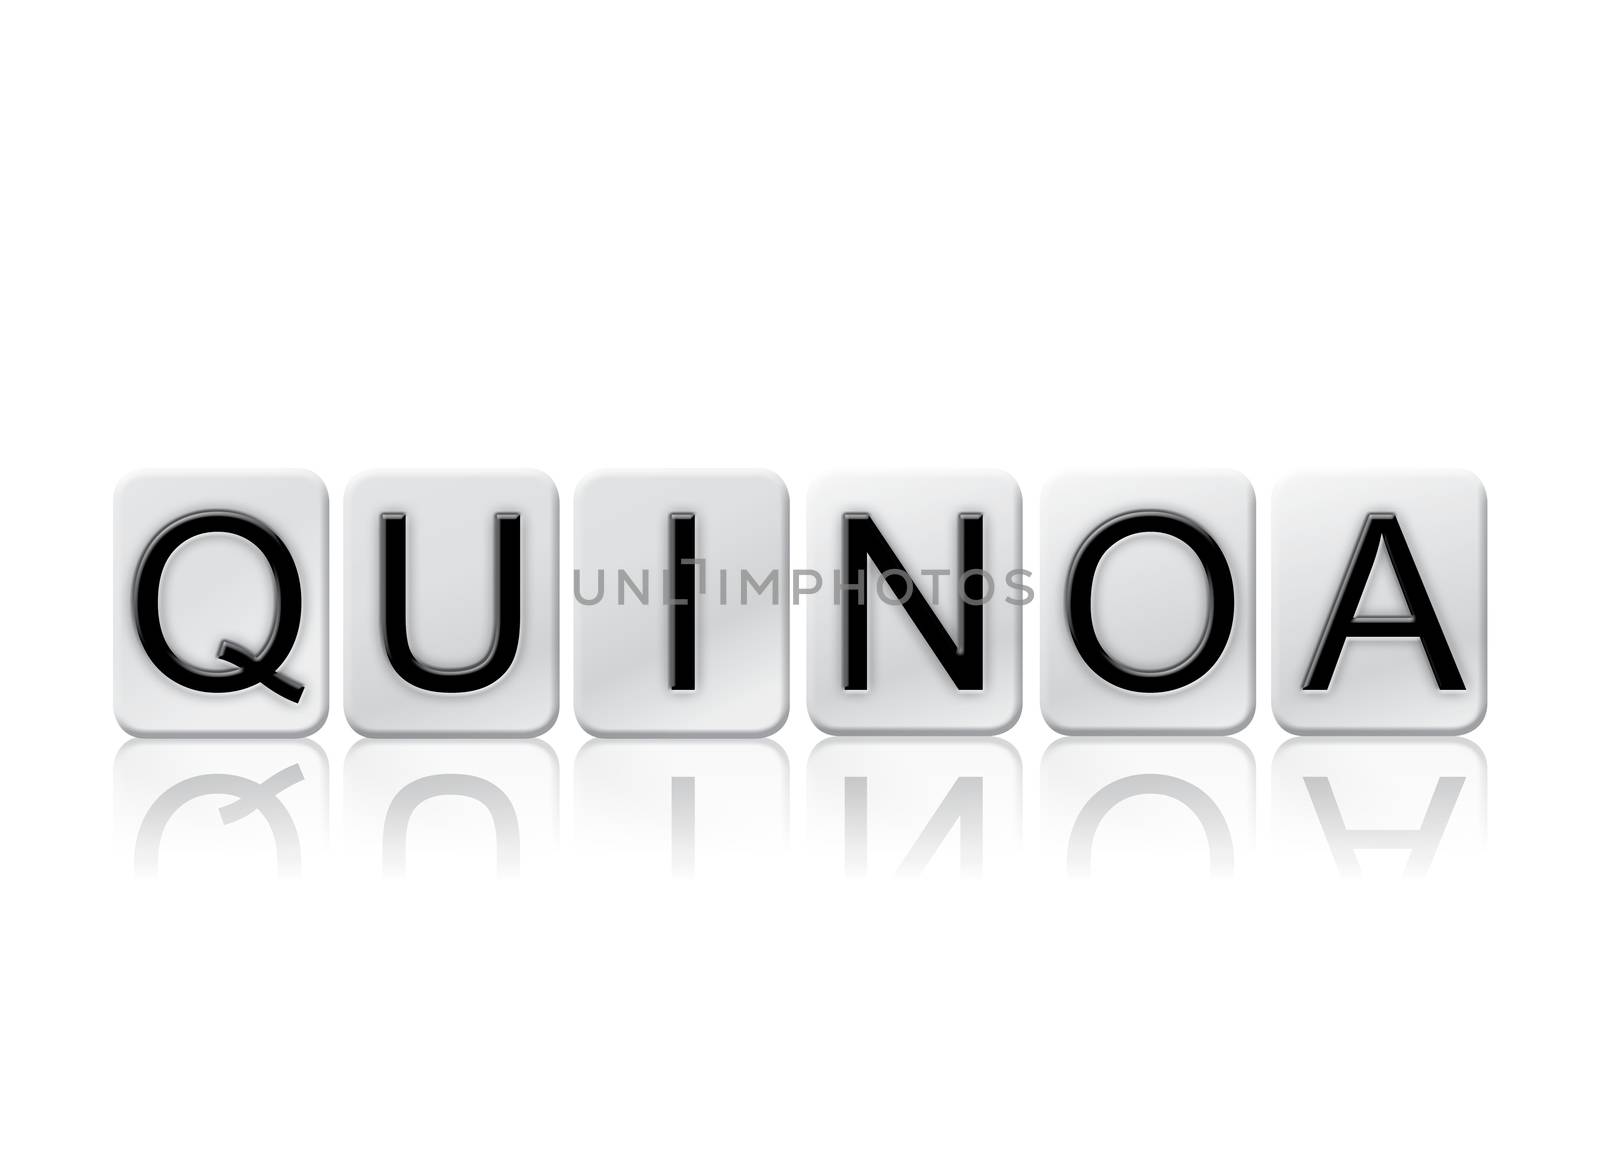 Quinoa Isolated Tiled Letters Concept and Theme by enterlinedesign